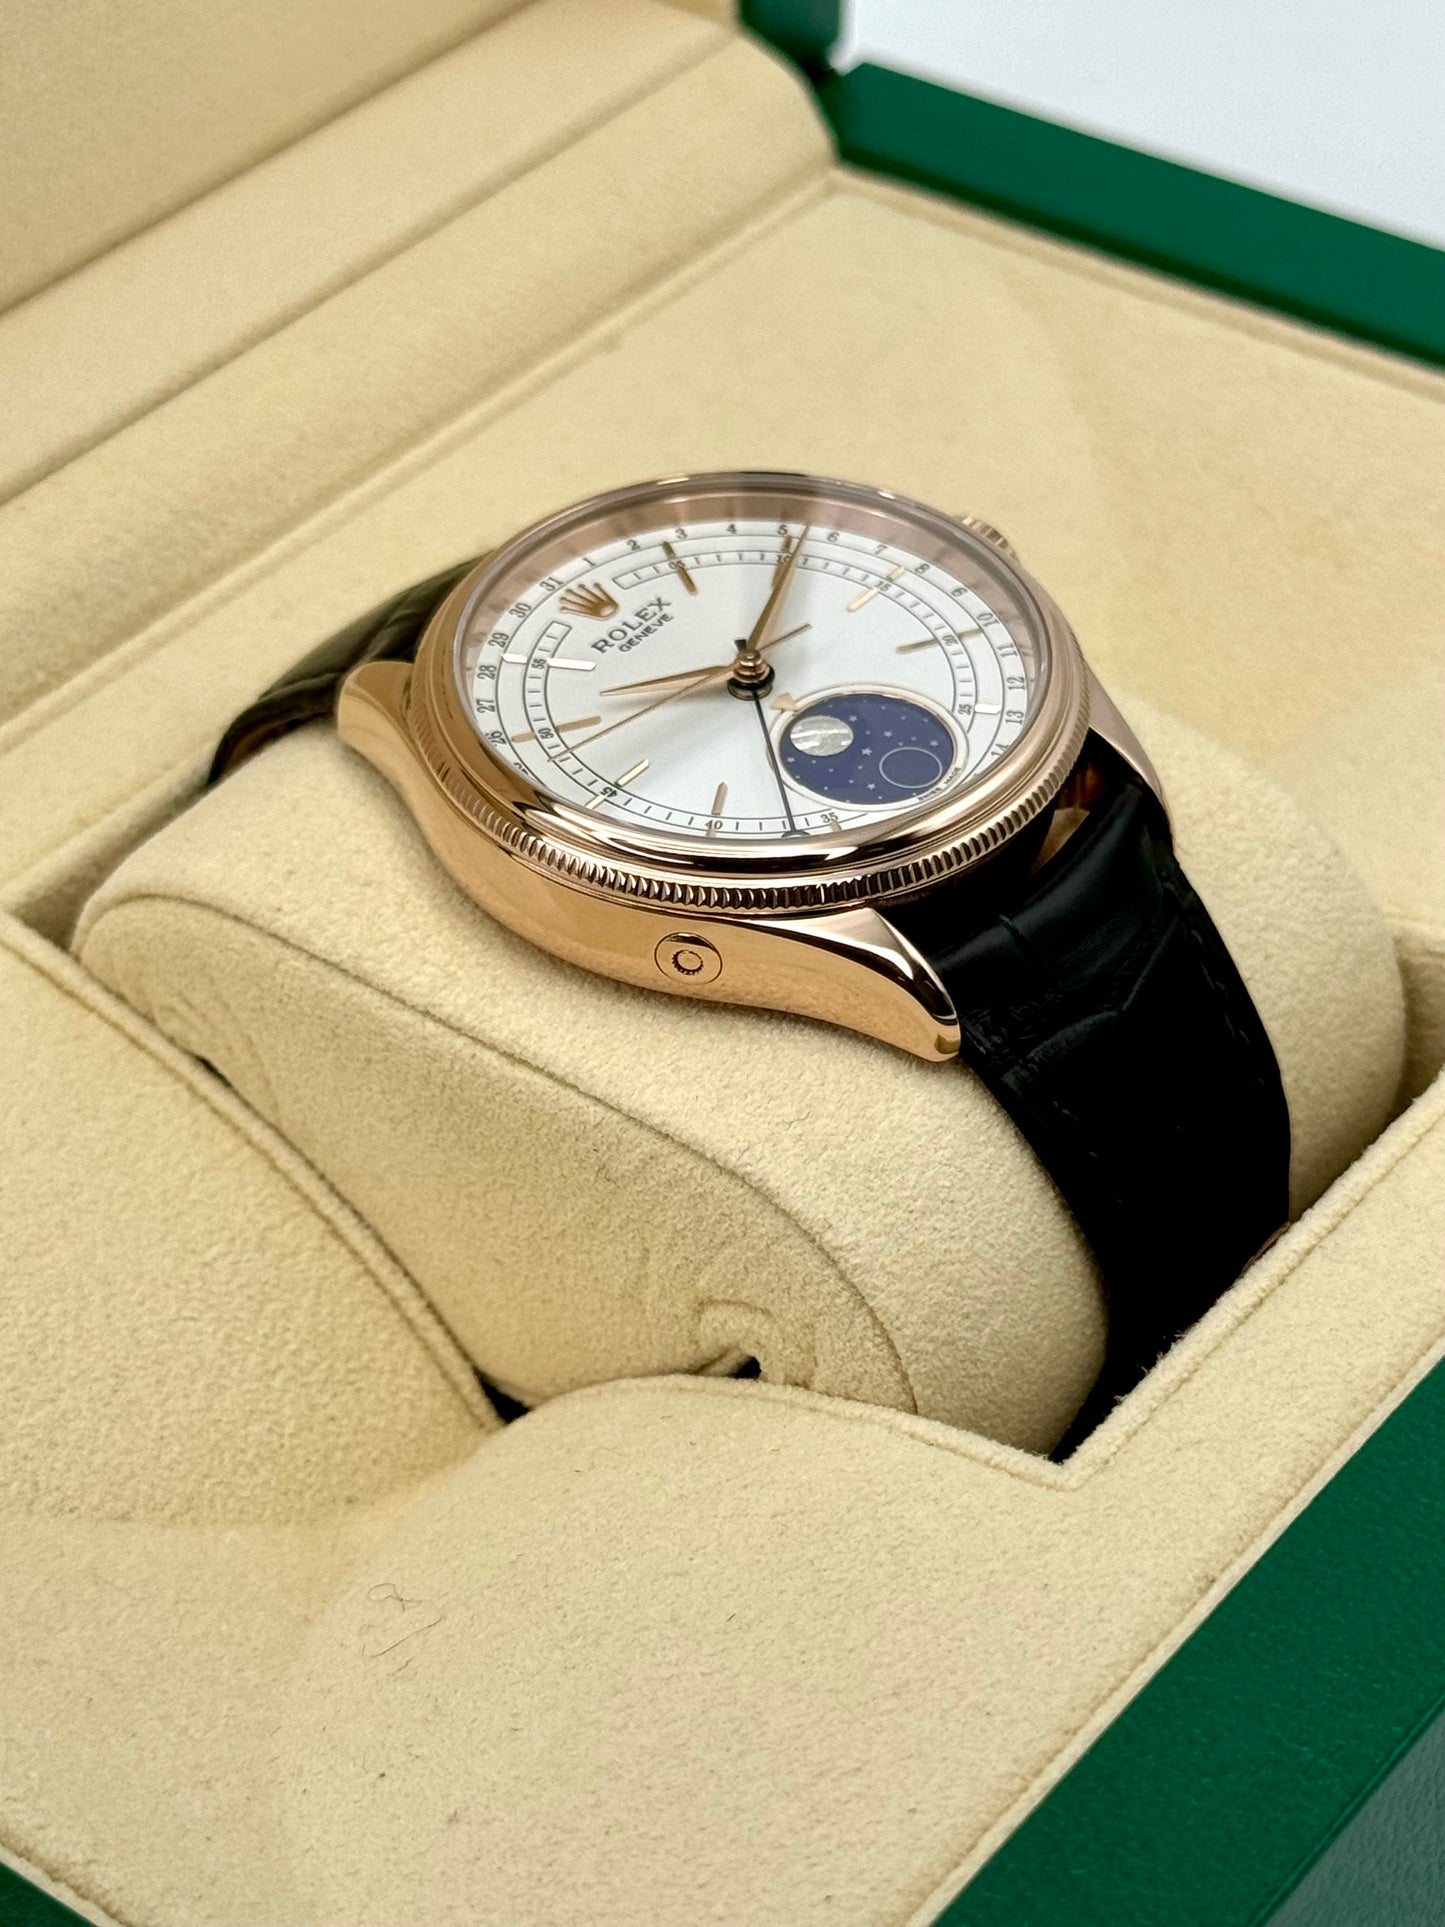 2018 Rolex Cellini Moonphase 39mm 50535 Rose Gold White Dial